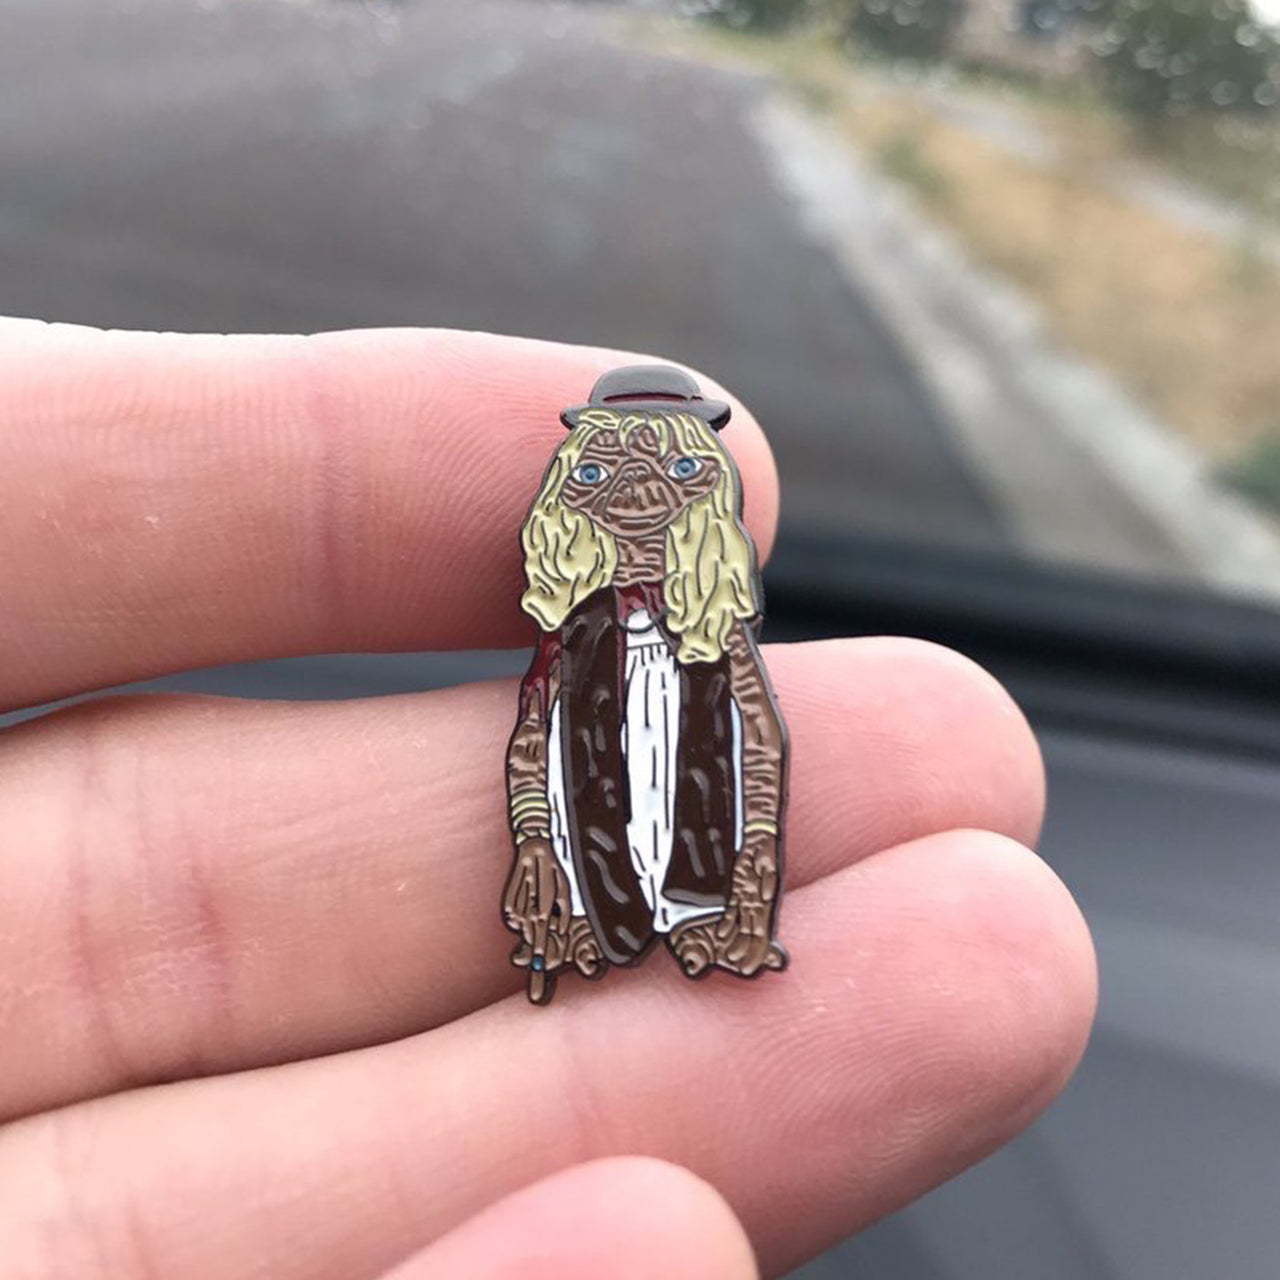 Dressed Up Extra-Terrestrial Pin